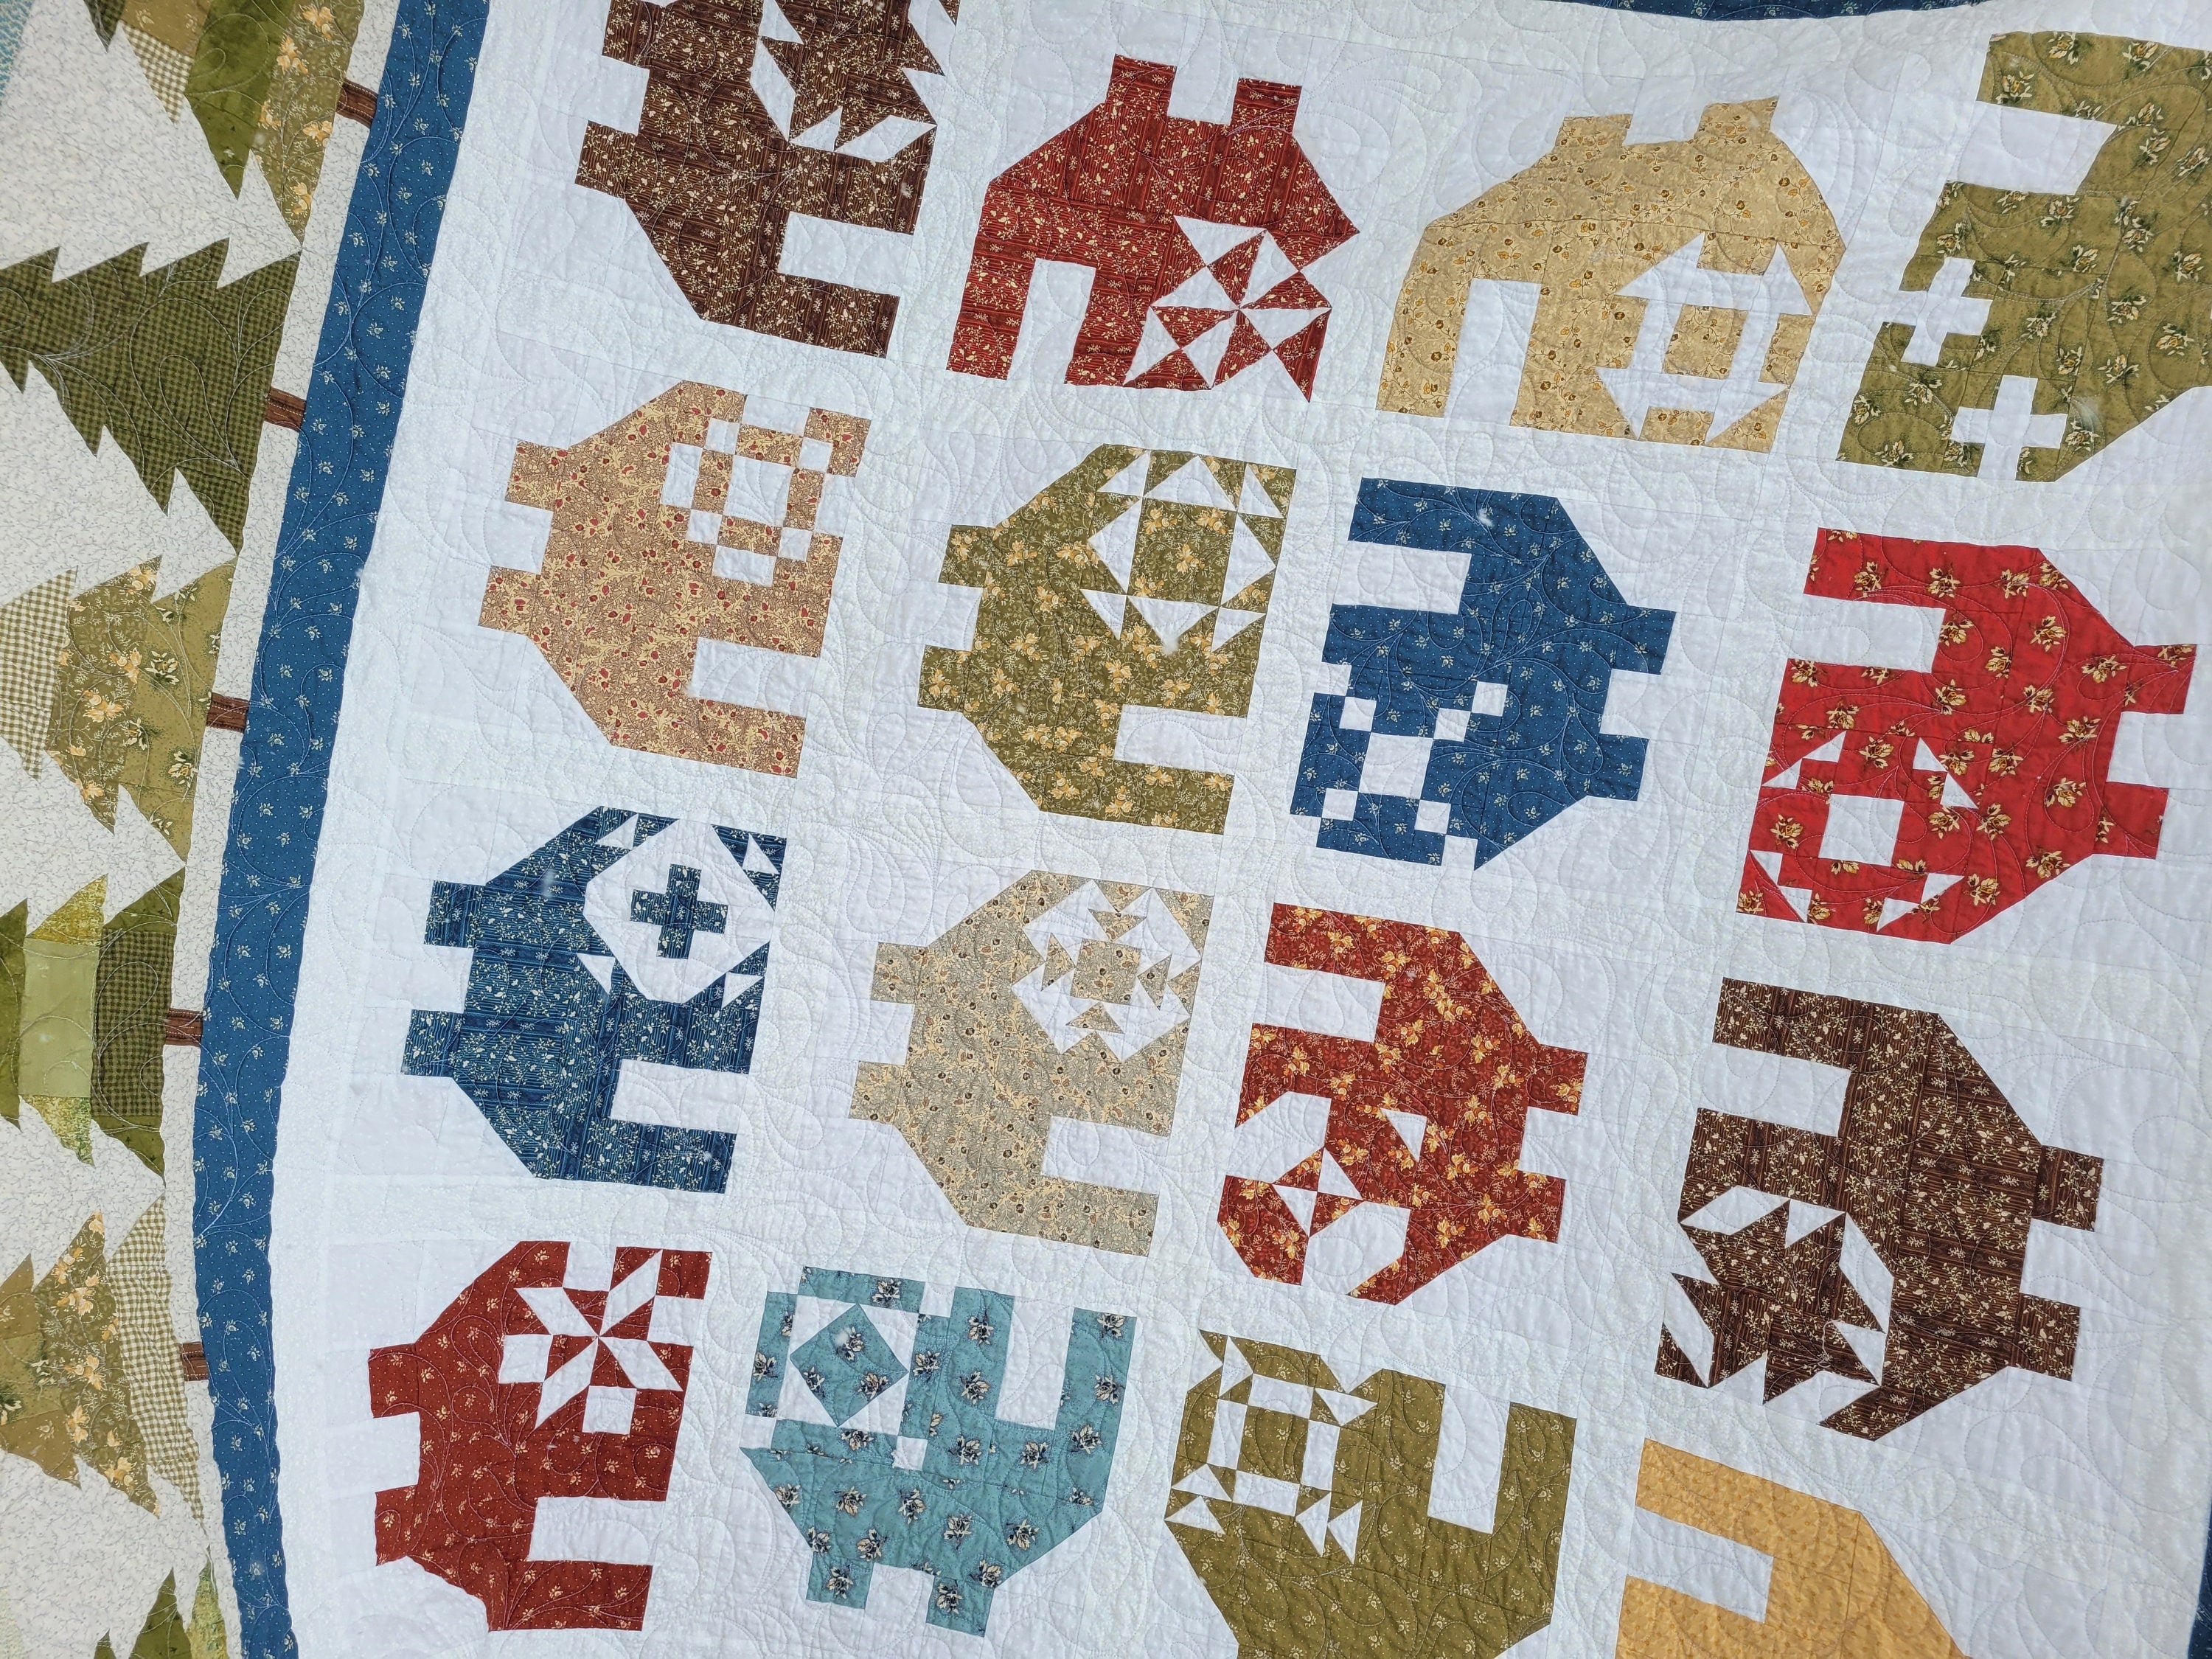 Scrappy Patchwork Village Throw Quilt with Trees and Soft Flannel Back, Sampler Block Houses